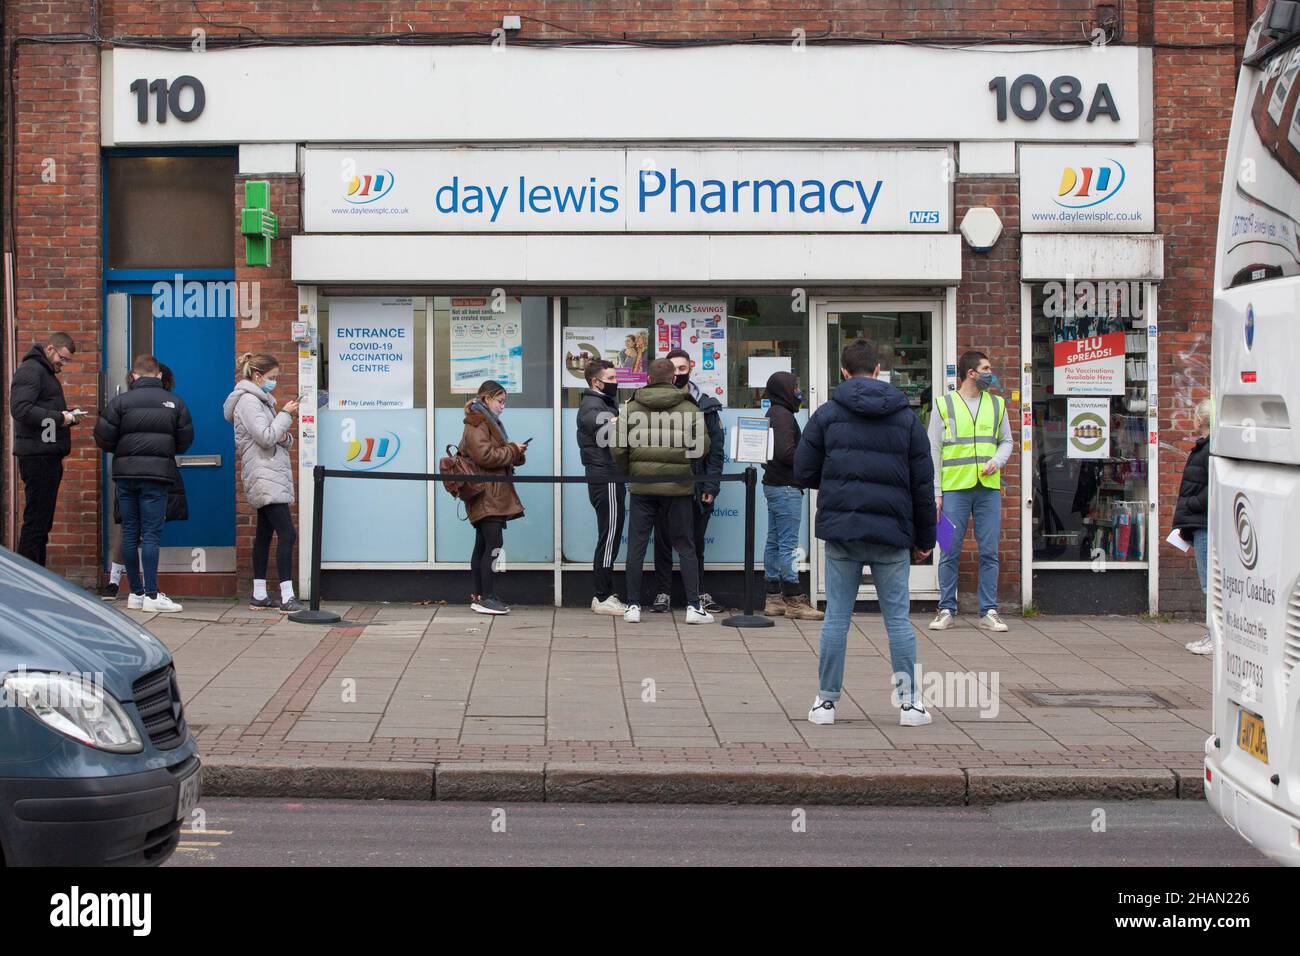 London, UK, 14 December 2021: There was only a short line of people queueing for booster jabs at Day Lewis Pharmacy on Brixton Hill. Booster jabs are now available at walk-in clinics for all adults over the age of 16 in England in the hope of curbing the spread of the omicron variant of coronavirus. Anna Watson/Alamy Live News Stock Photo